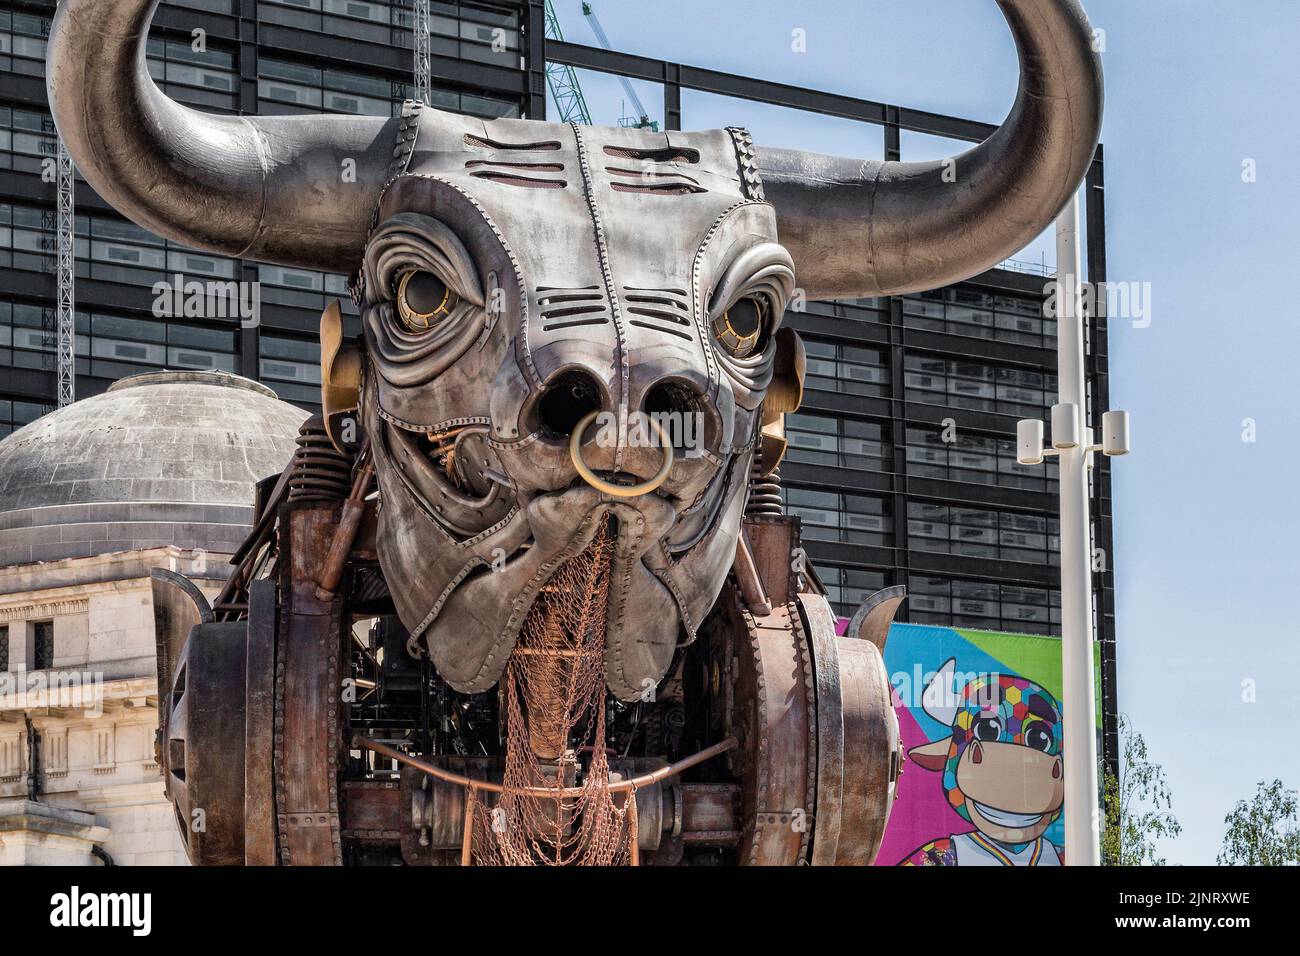 Detail of the 10 metre high raging bull from the 2022 Commonwealth Games opening ceremony, now a very popular tourist attraction in Birmingham. Stock Photo